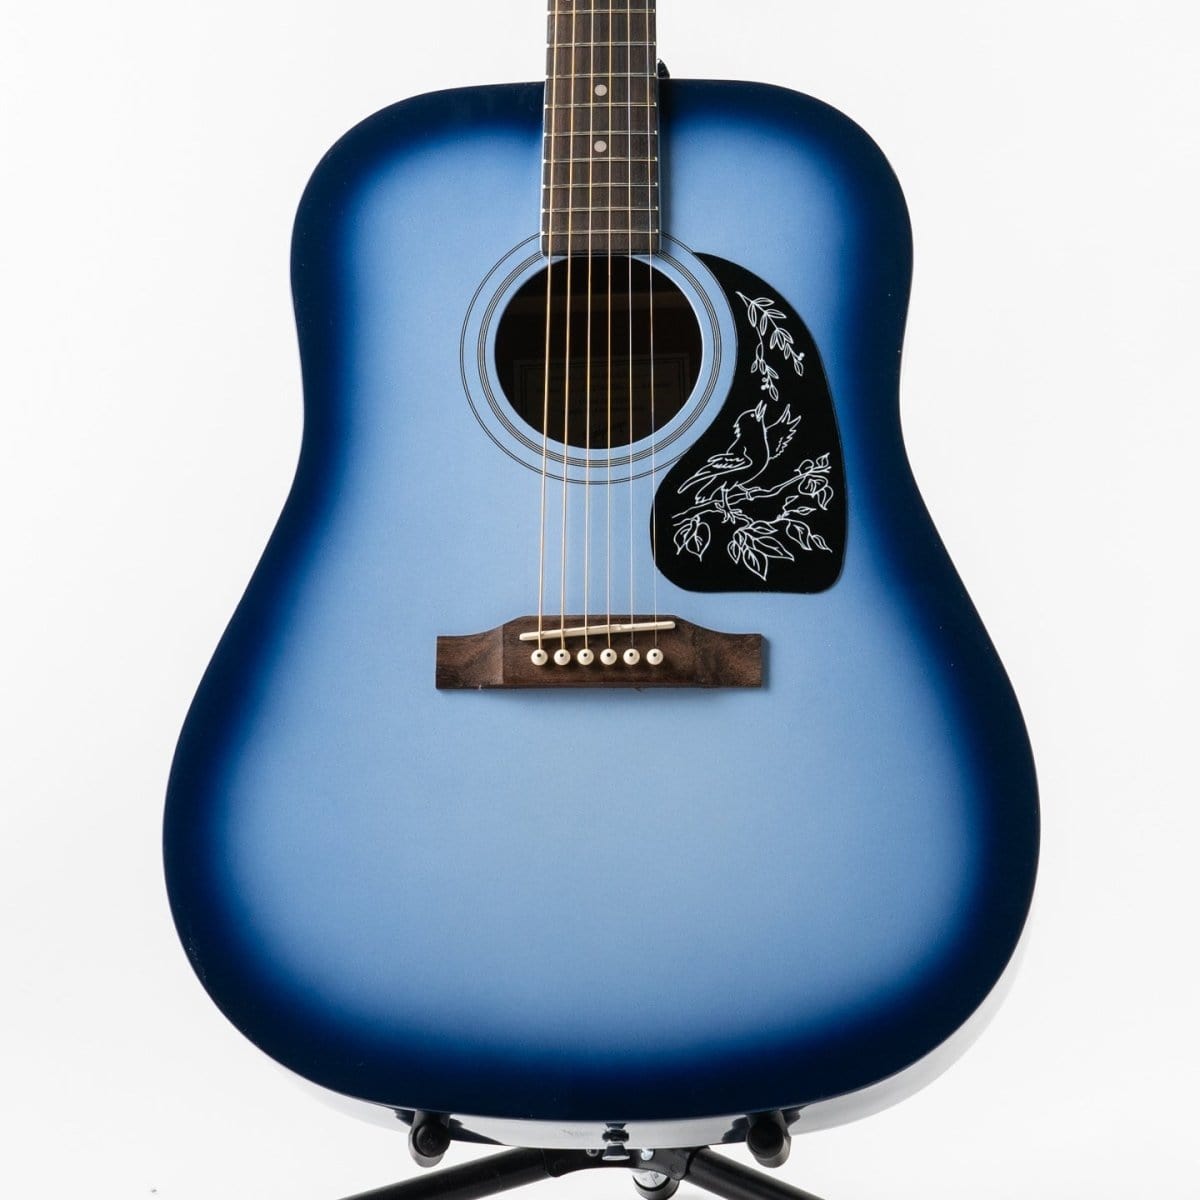 Epiphone Starling Starlight Blue Dreadnought Acoustic Guitar